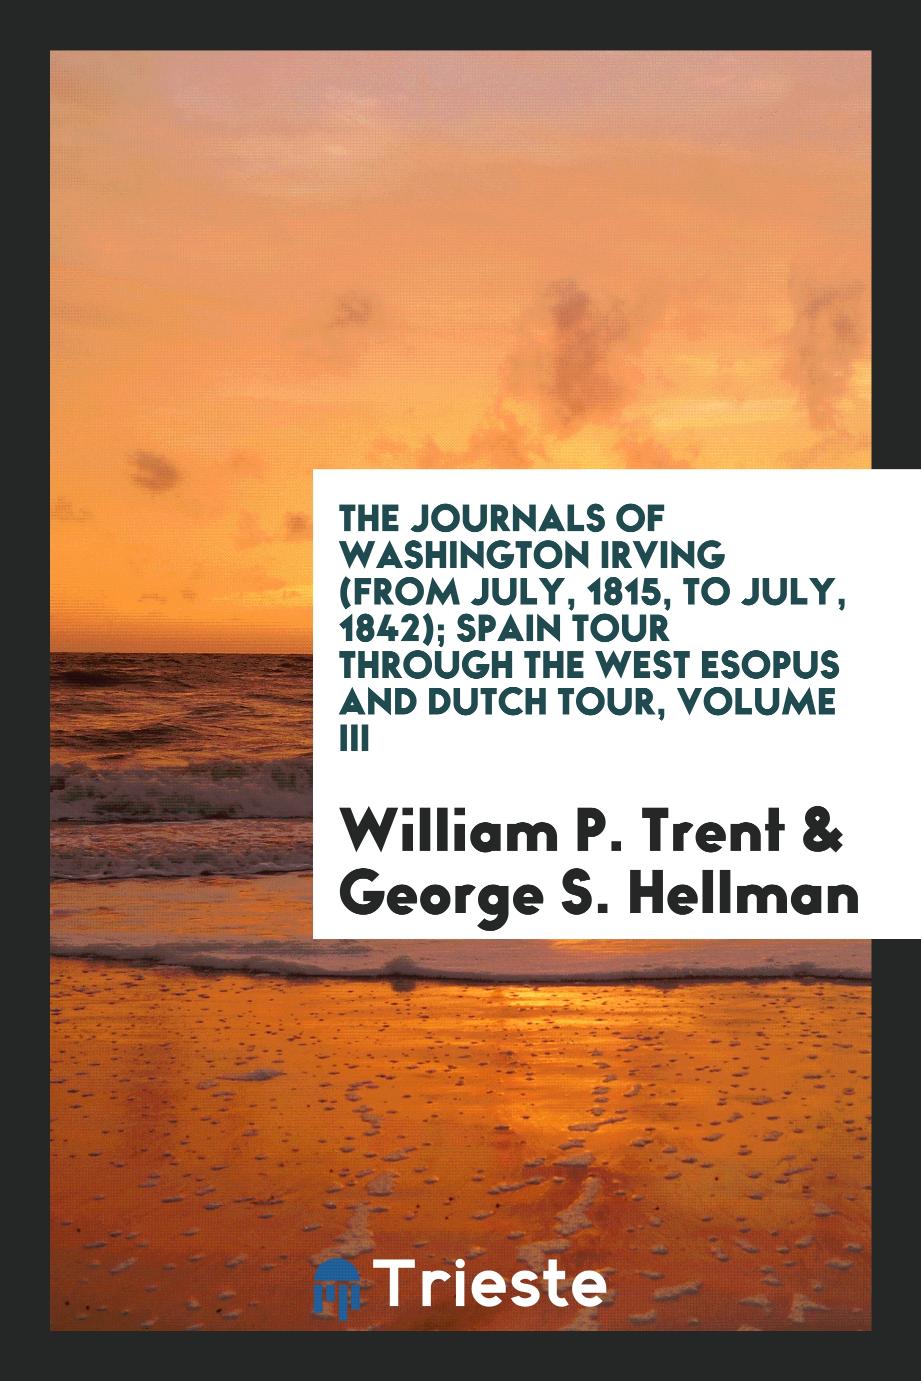 The journals of Washington Irving (From July, 1815, to July, 1842); Spain tour through the West Esopus and Dutch tour, Volume III